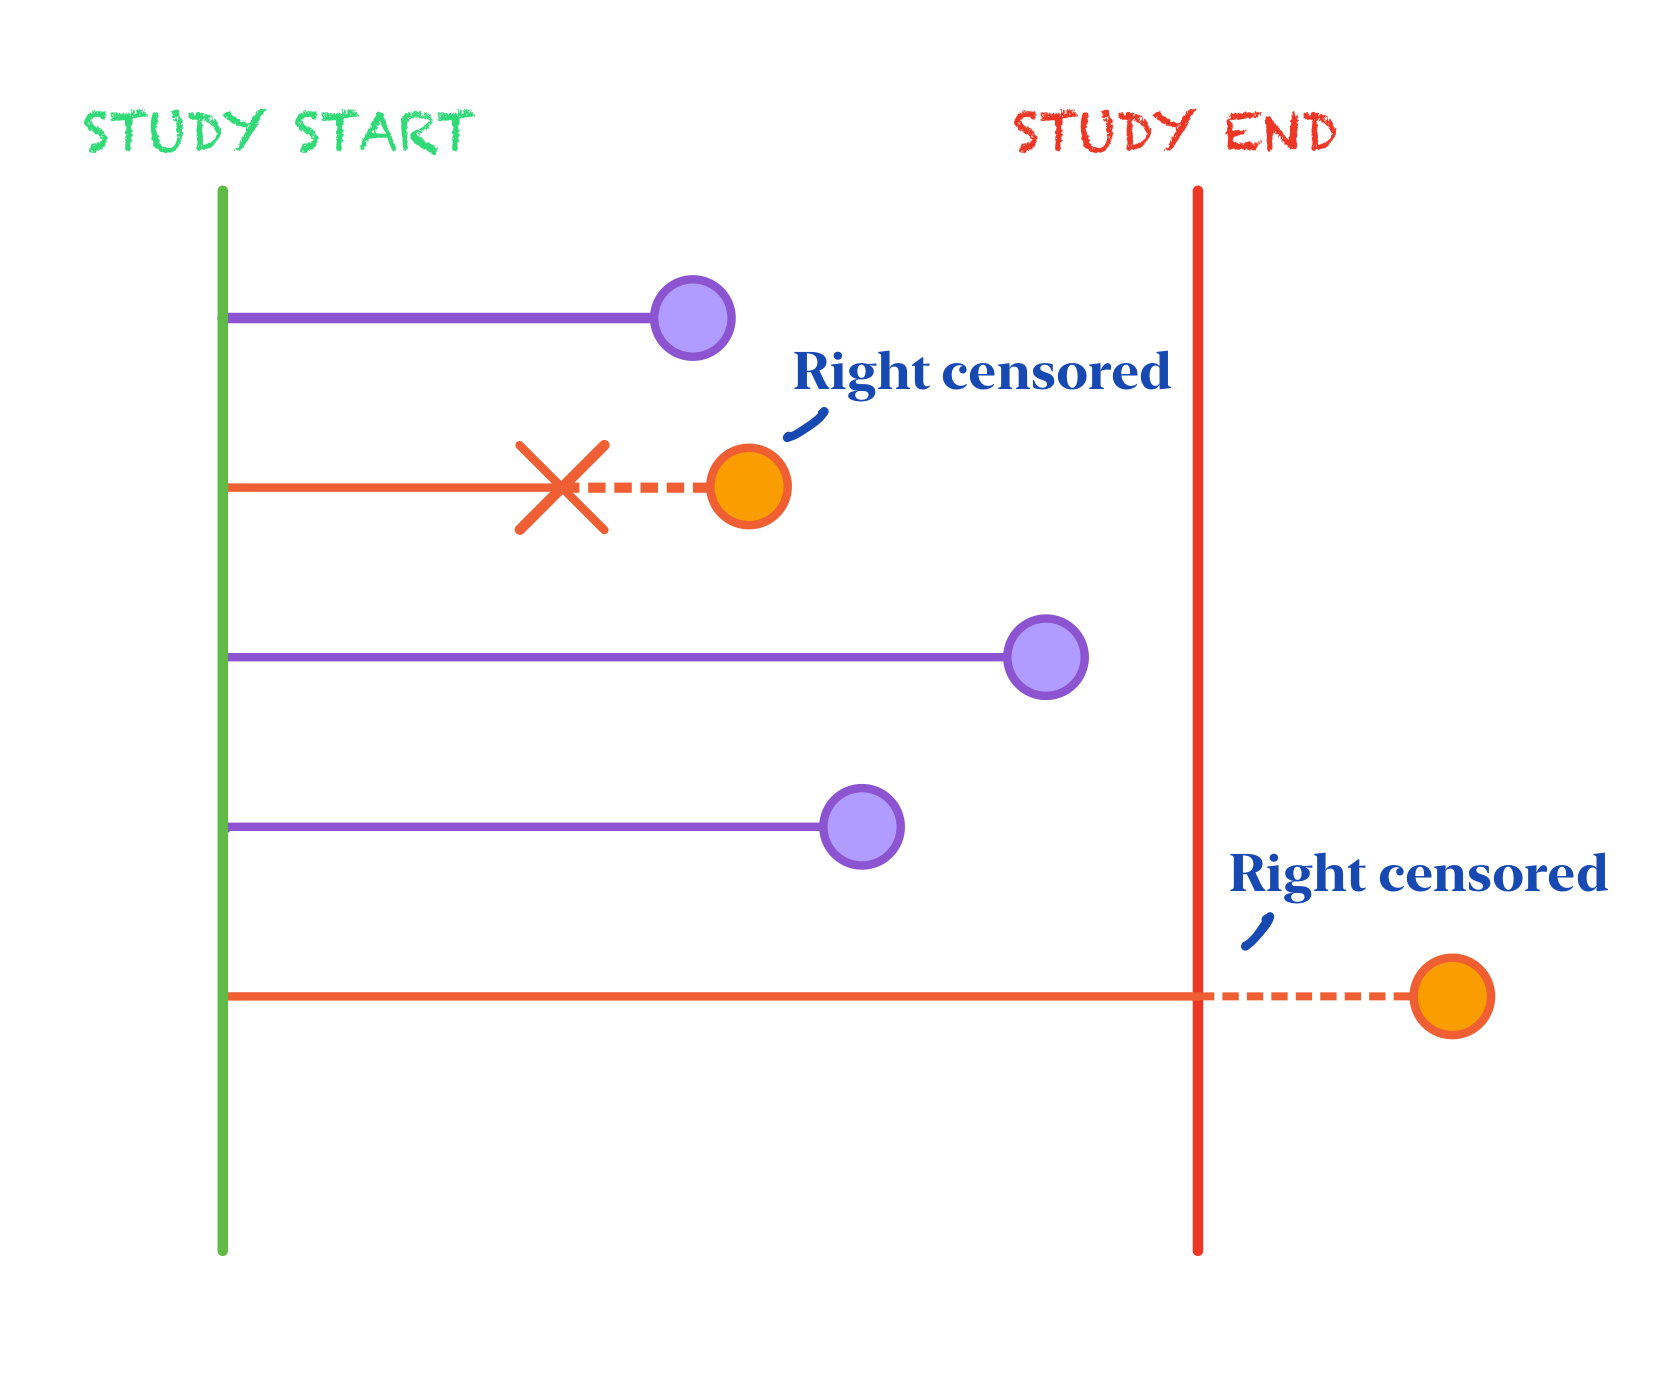 Right censoring occurs when a subject enters the study before experiencing the event of interest at time = 0 and leaves the study without experiencing the event either by not staying the full observational time, or staying the full time without having the event occur.